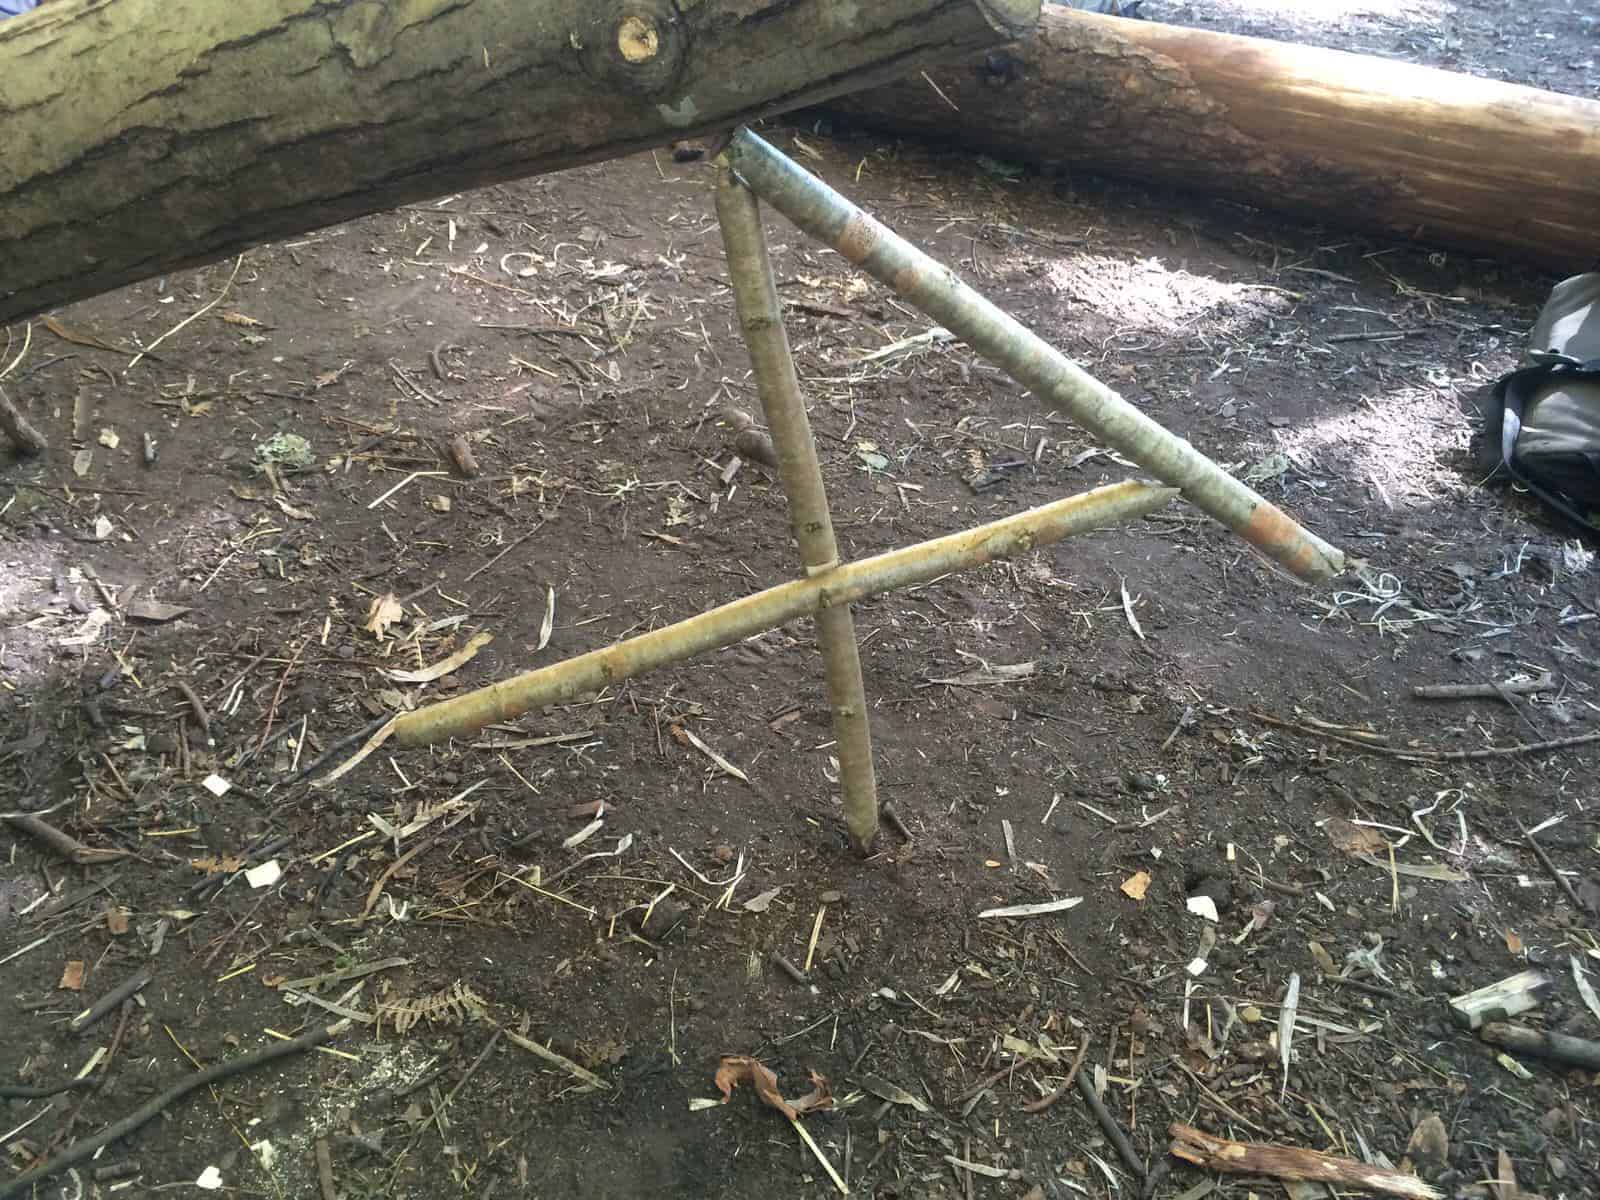 Bushcraft trapping and snares from Wildway Bushcraft